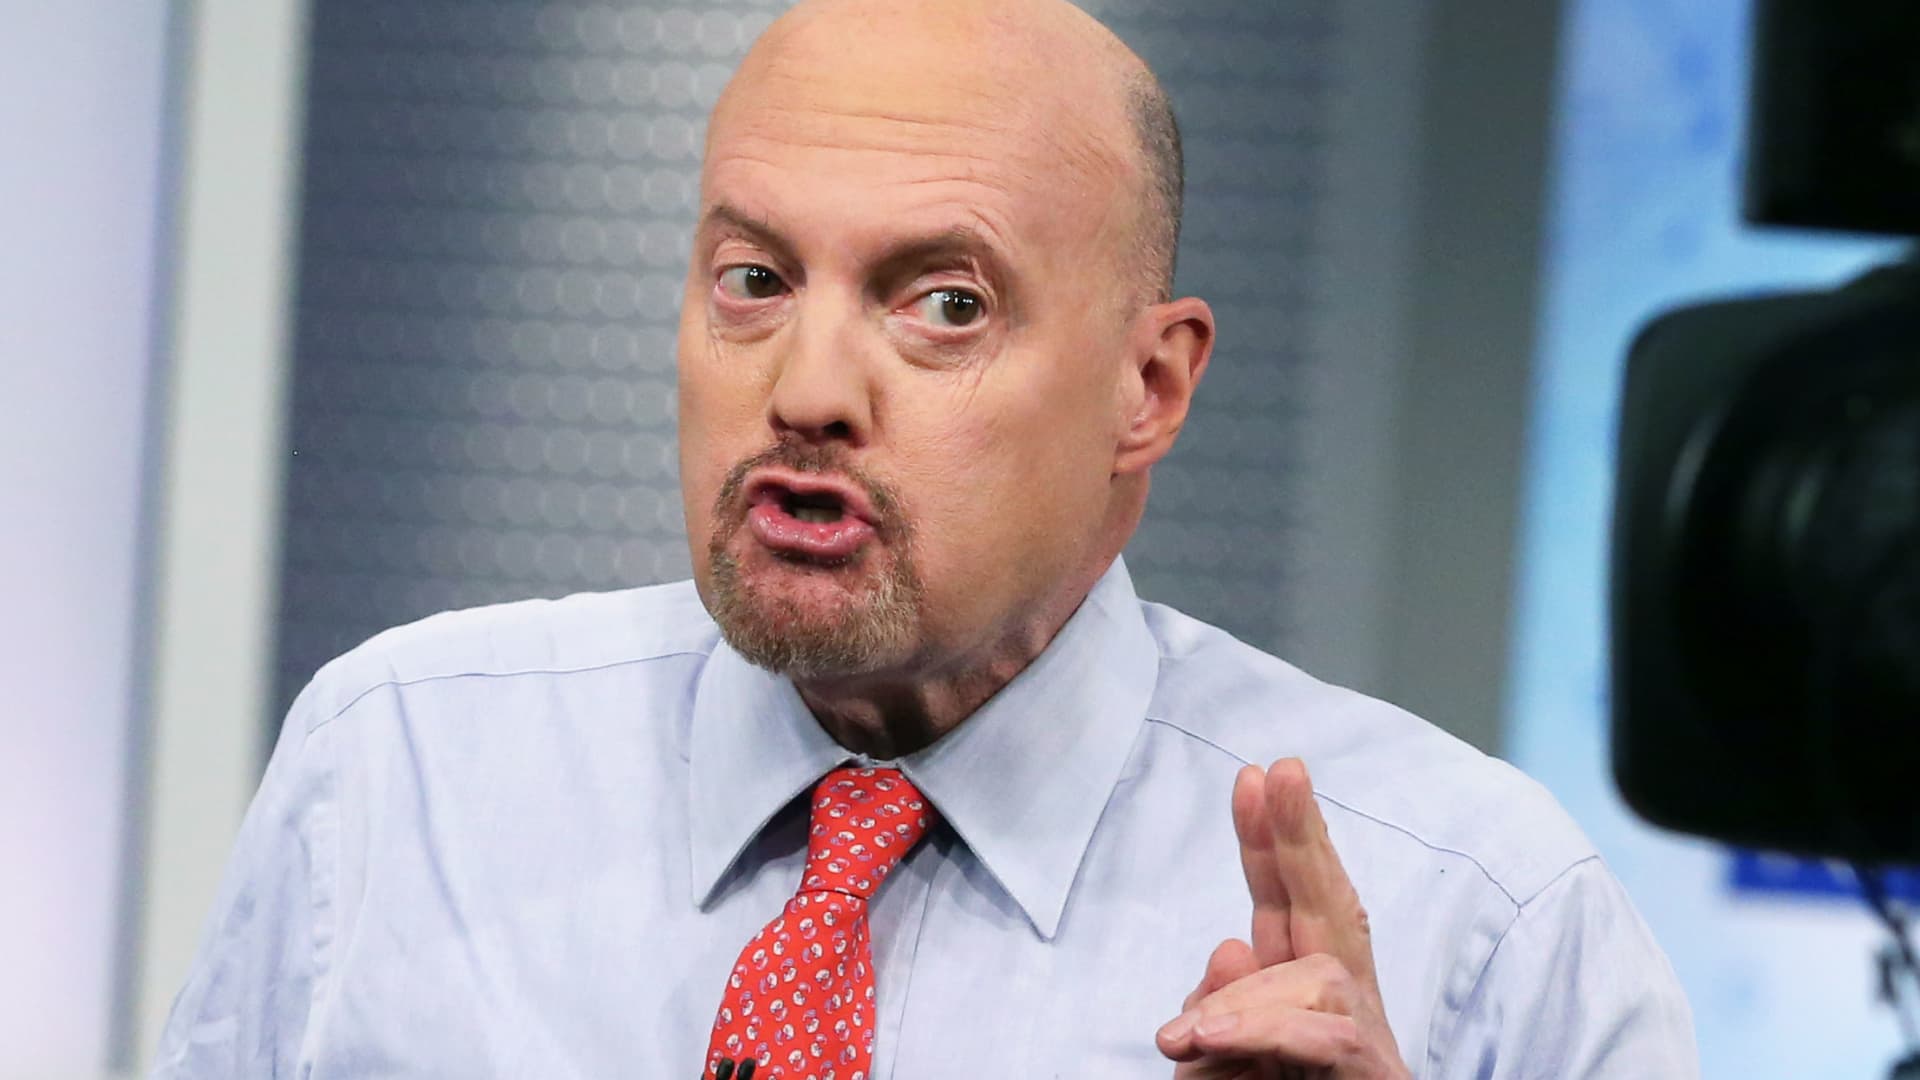 Jim Cramer advises investors to take a case-by-case approach to stocks